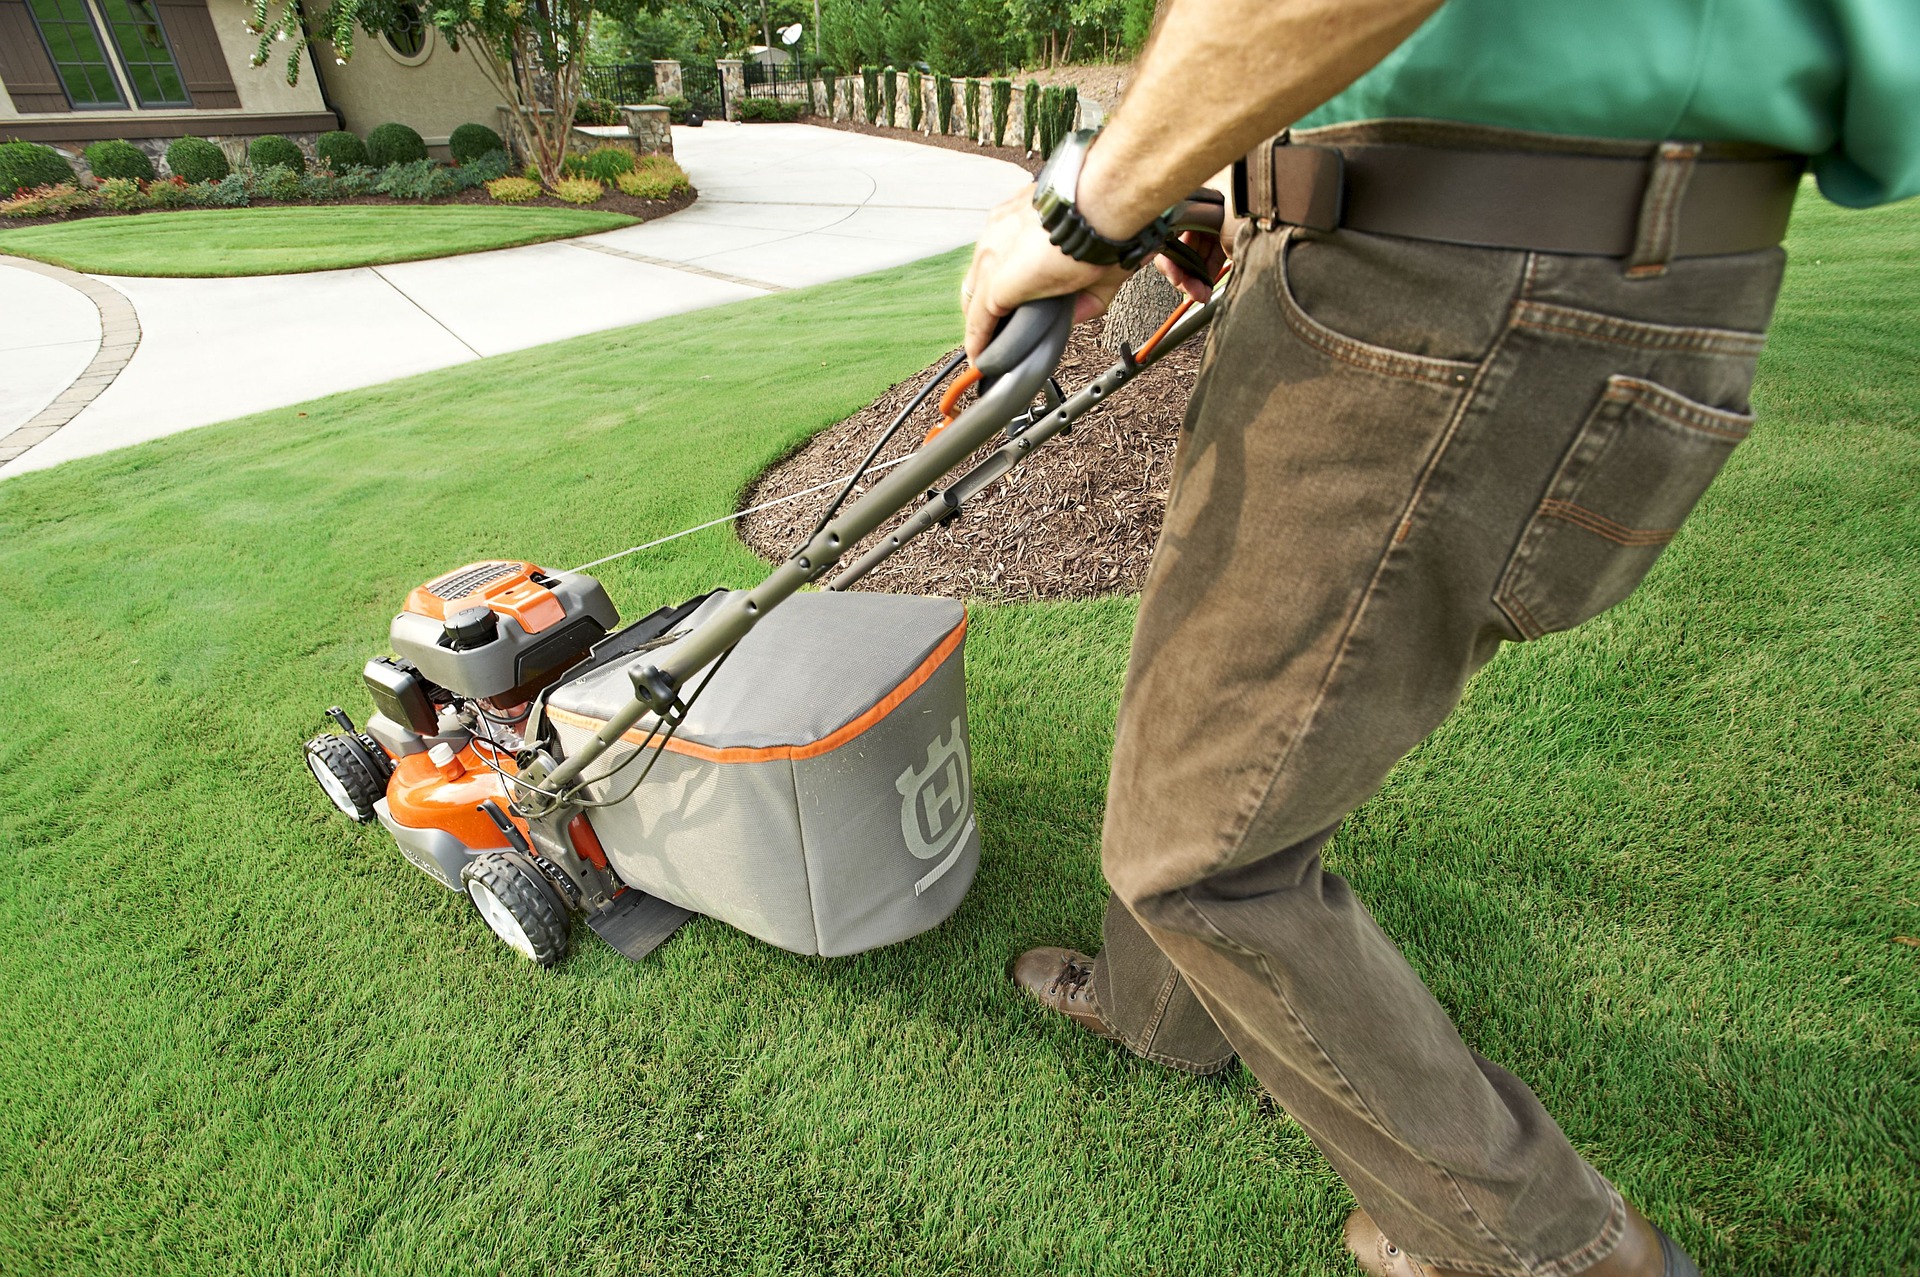 Landscaper mowing the lawn with a lawn mower purchased with equipment financing.